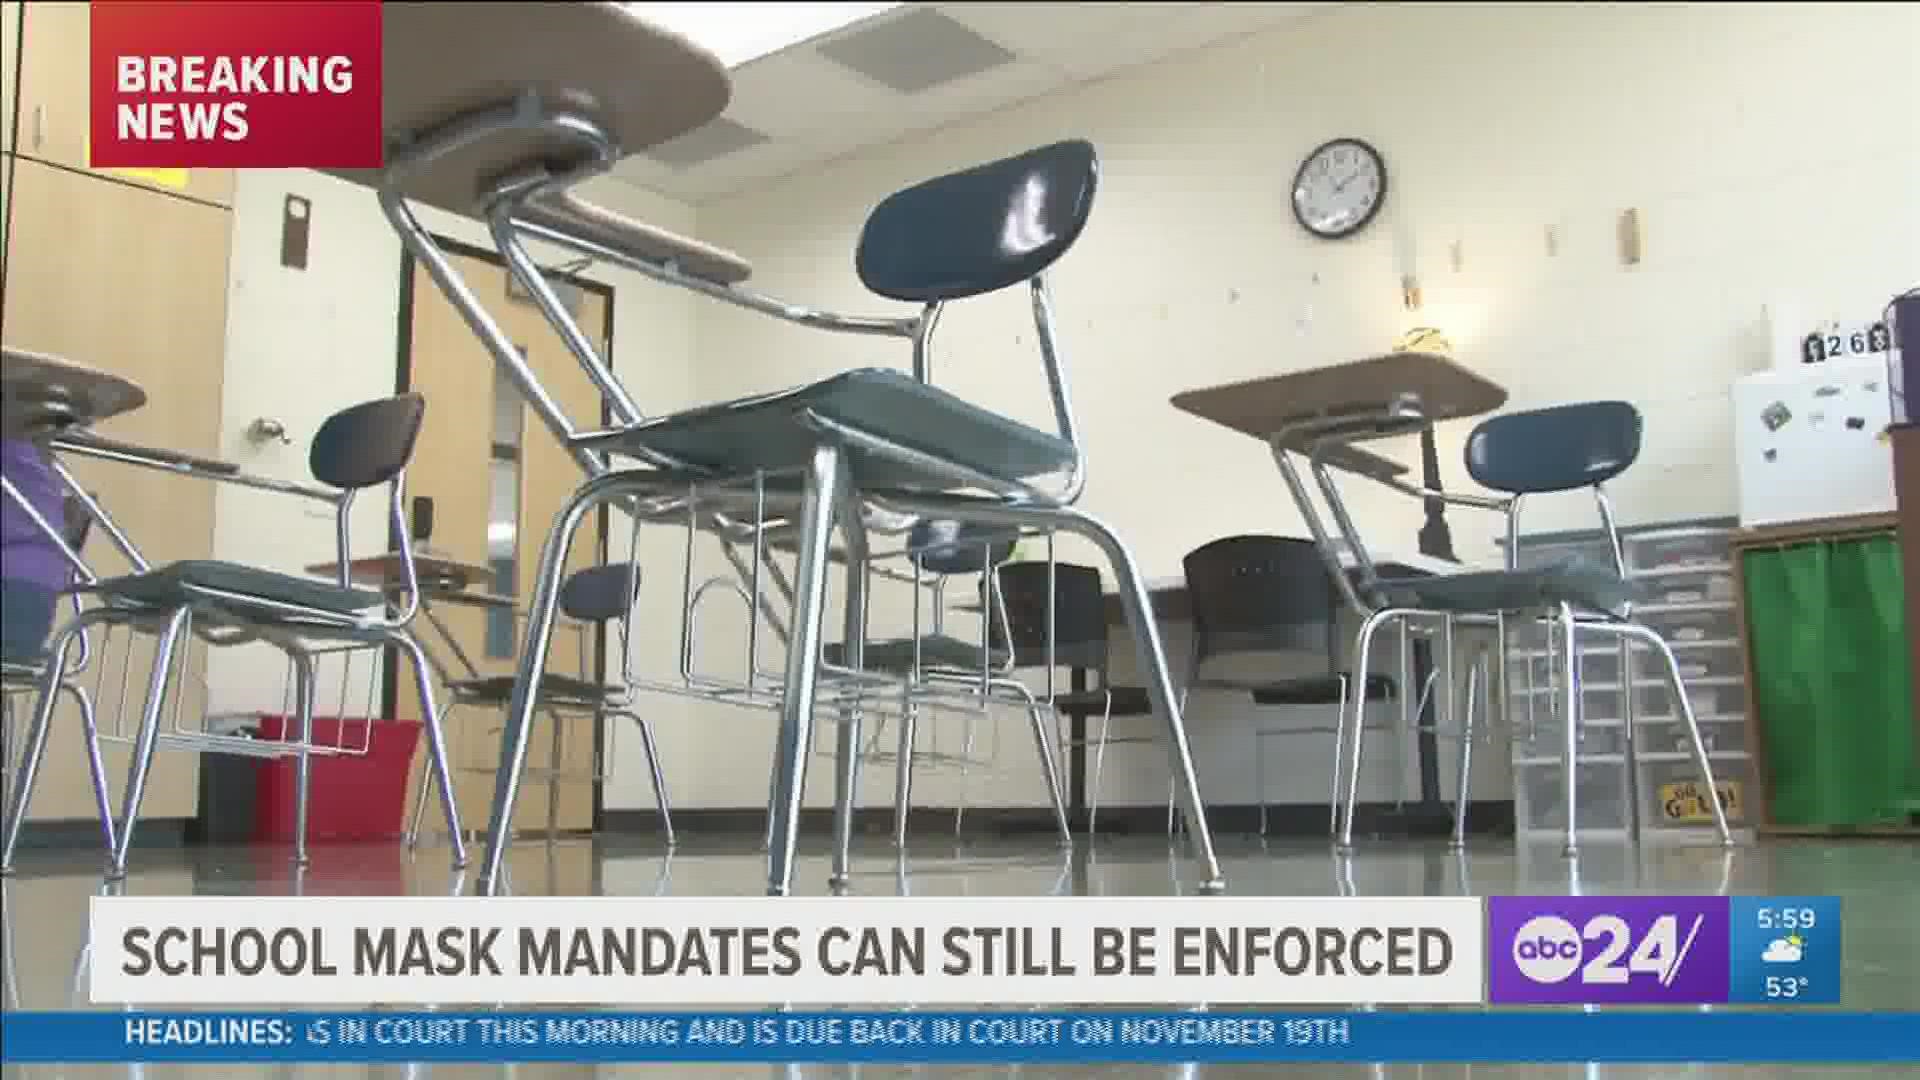 The COVID-19 was signed into law Friday by Gov. Bill Lee - but a federal judge said Shelby County can keep the public school mask mandate in place.